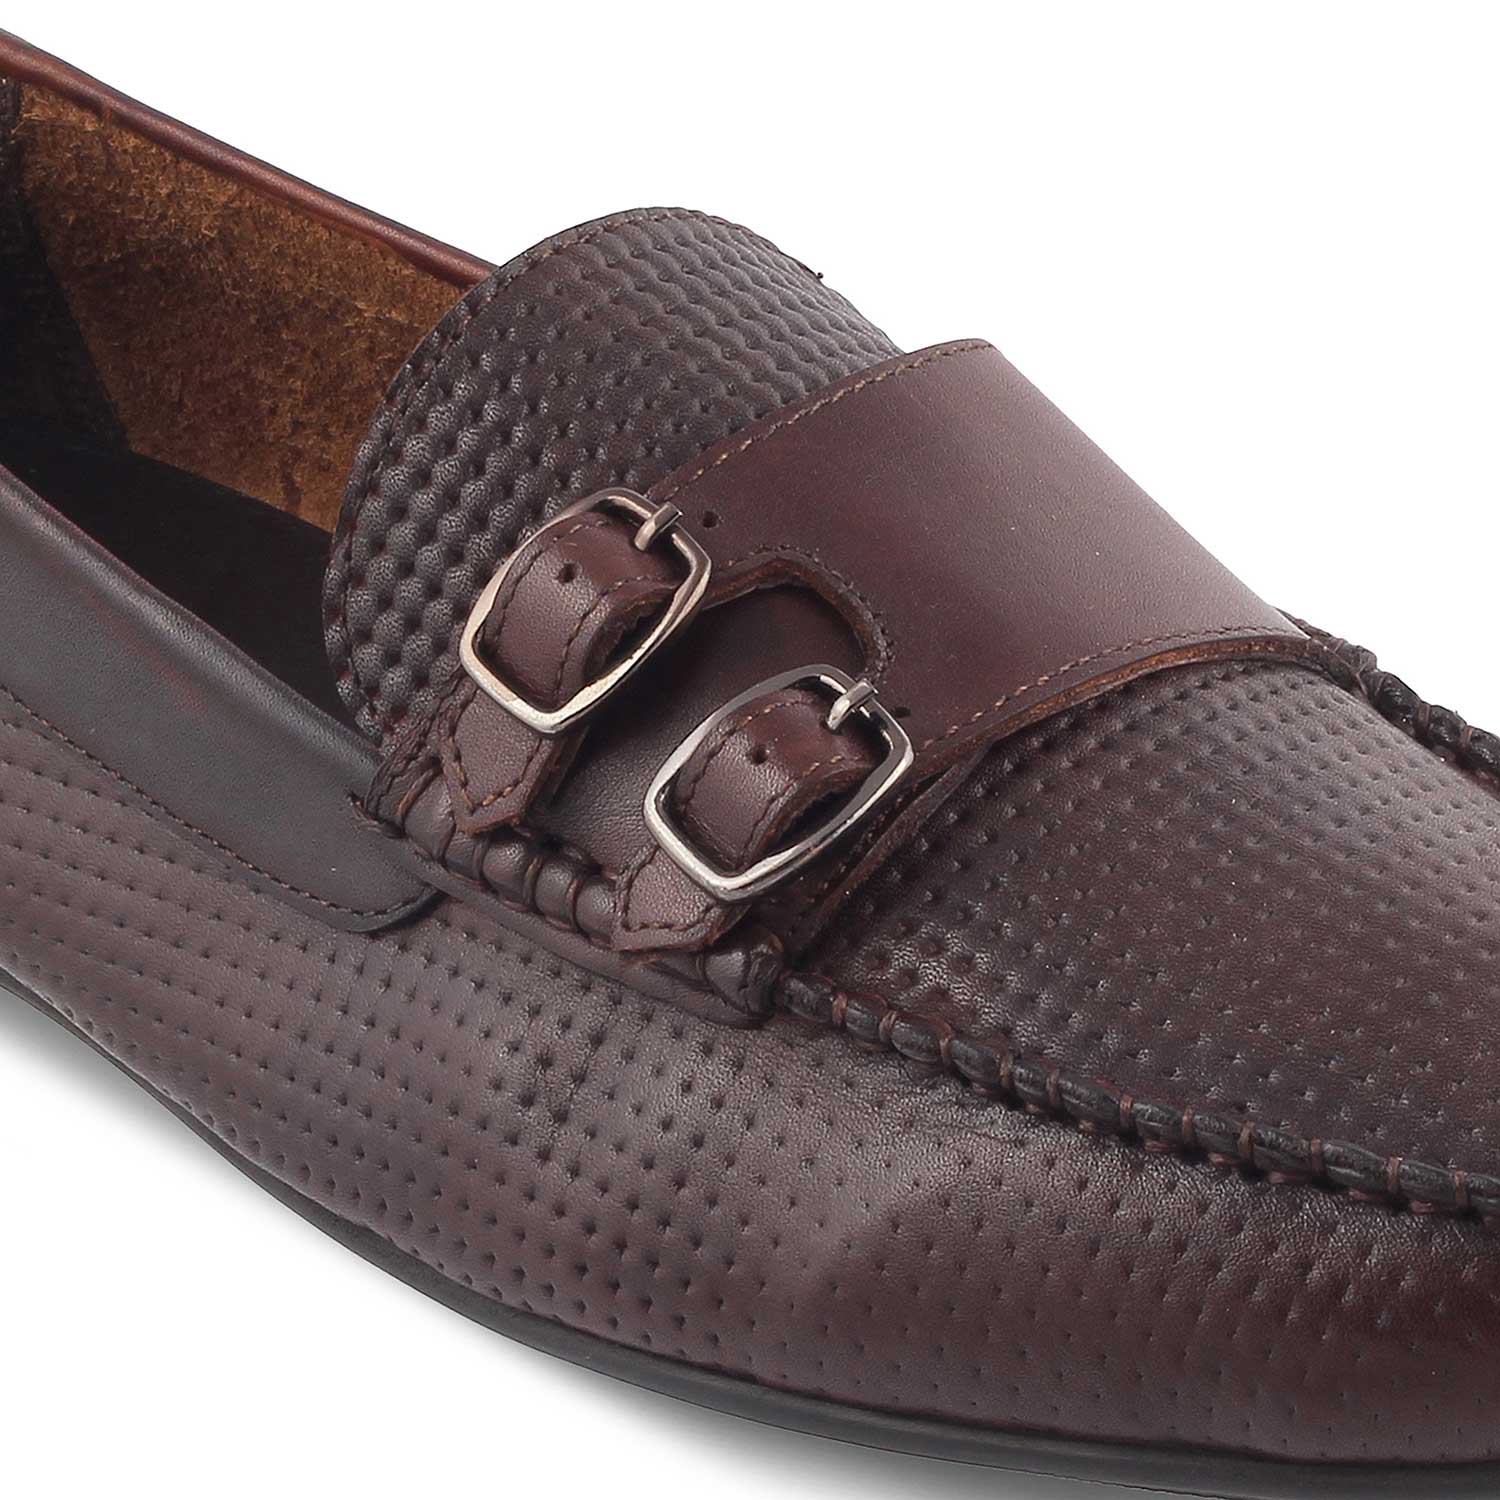 The Yosa Brown Men's Double Monk Shoes Tresmode - Tresmode